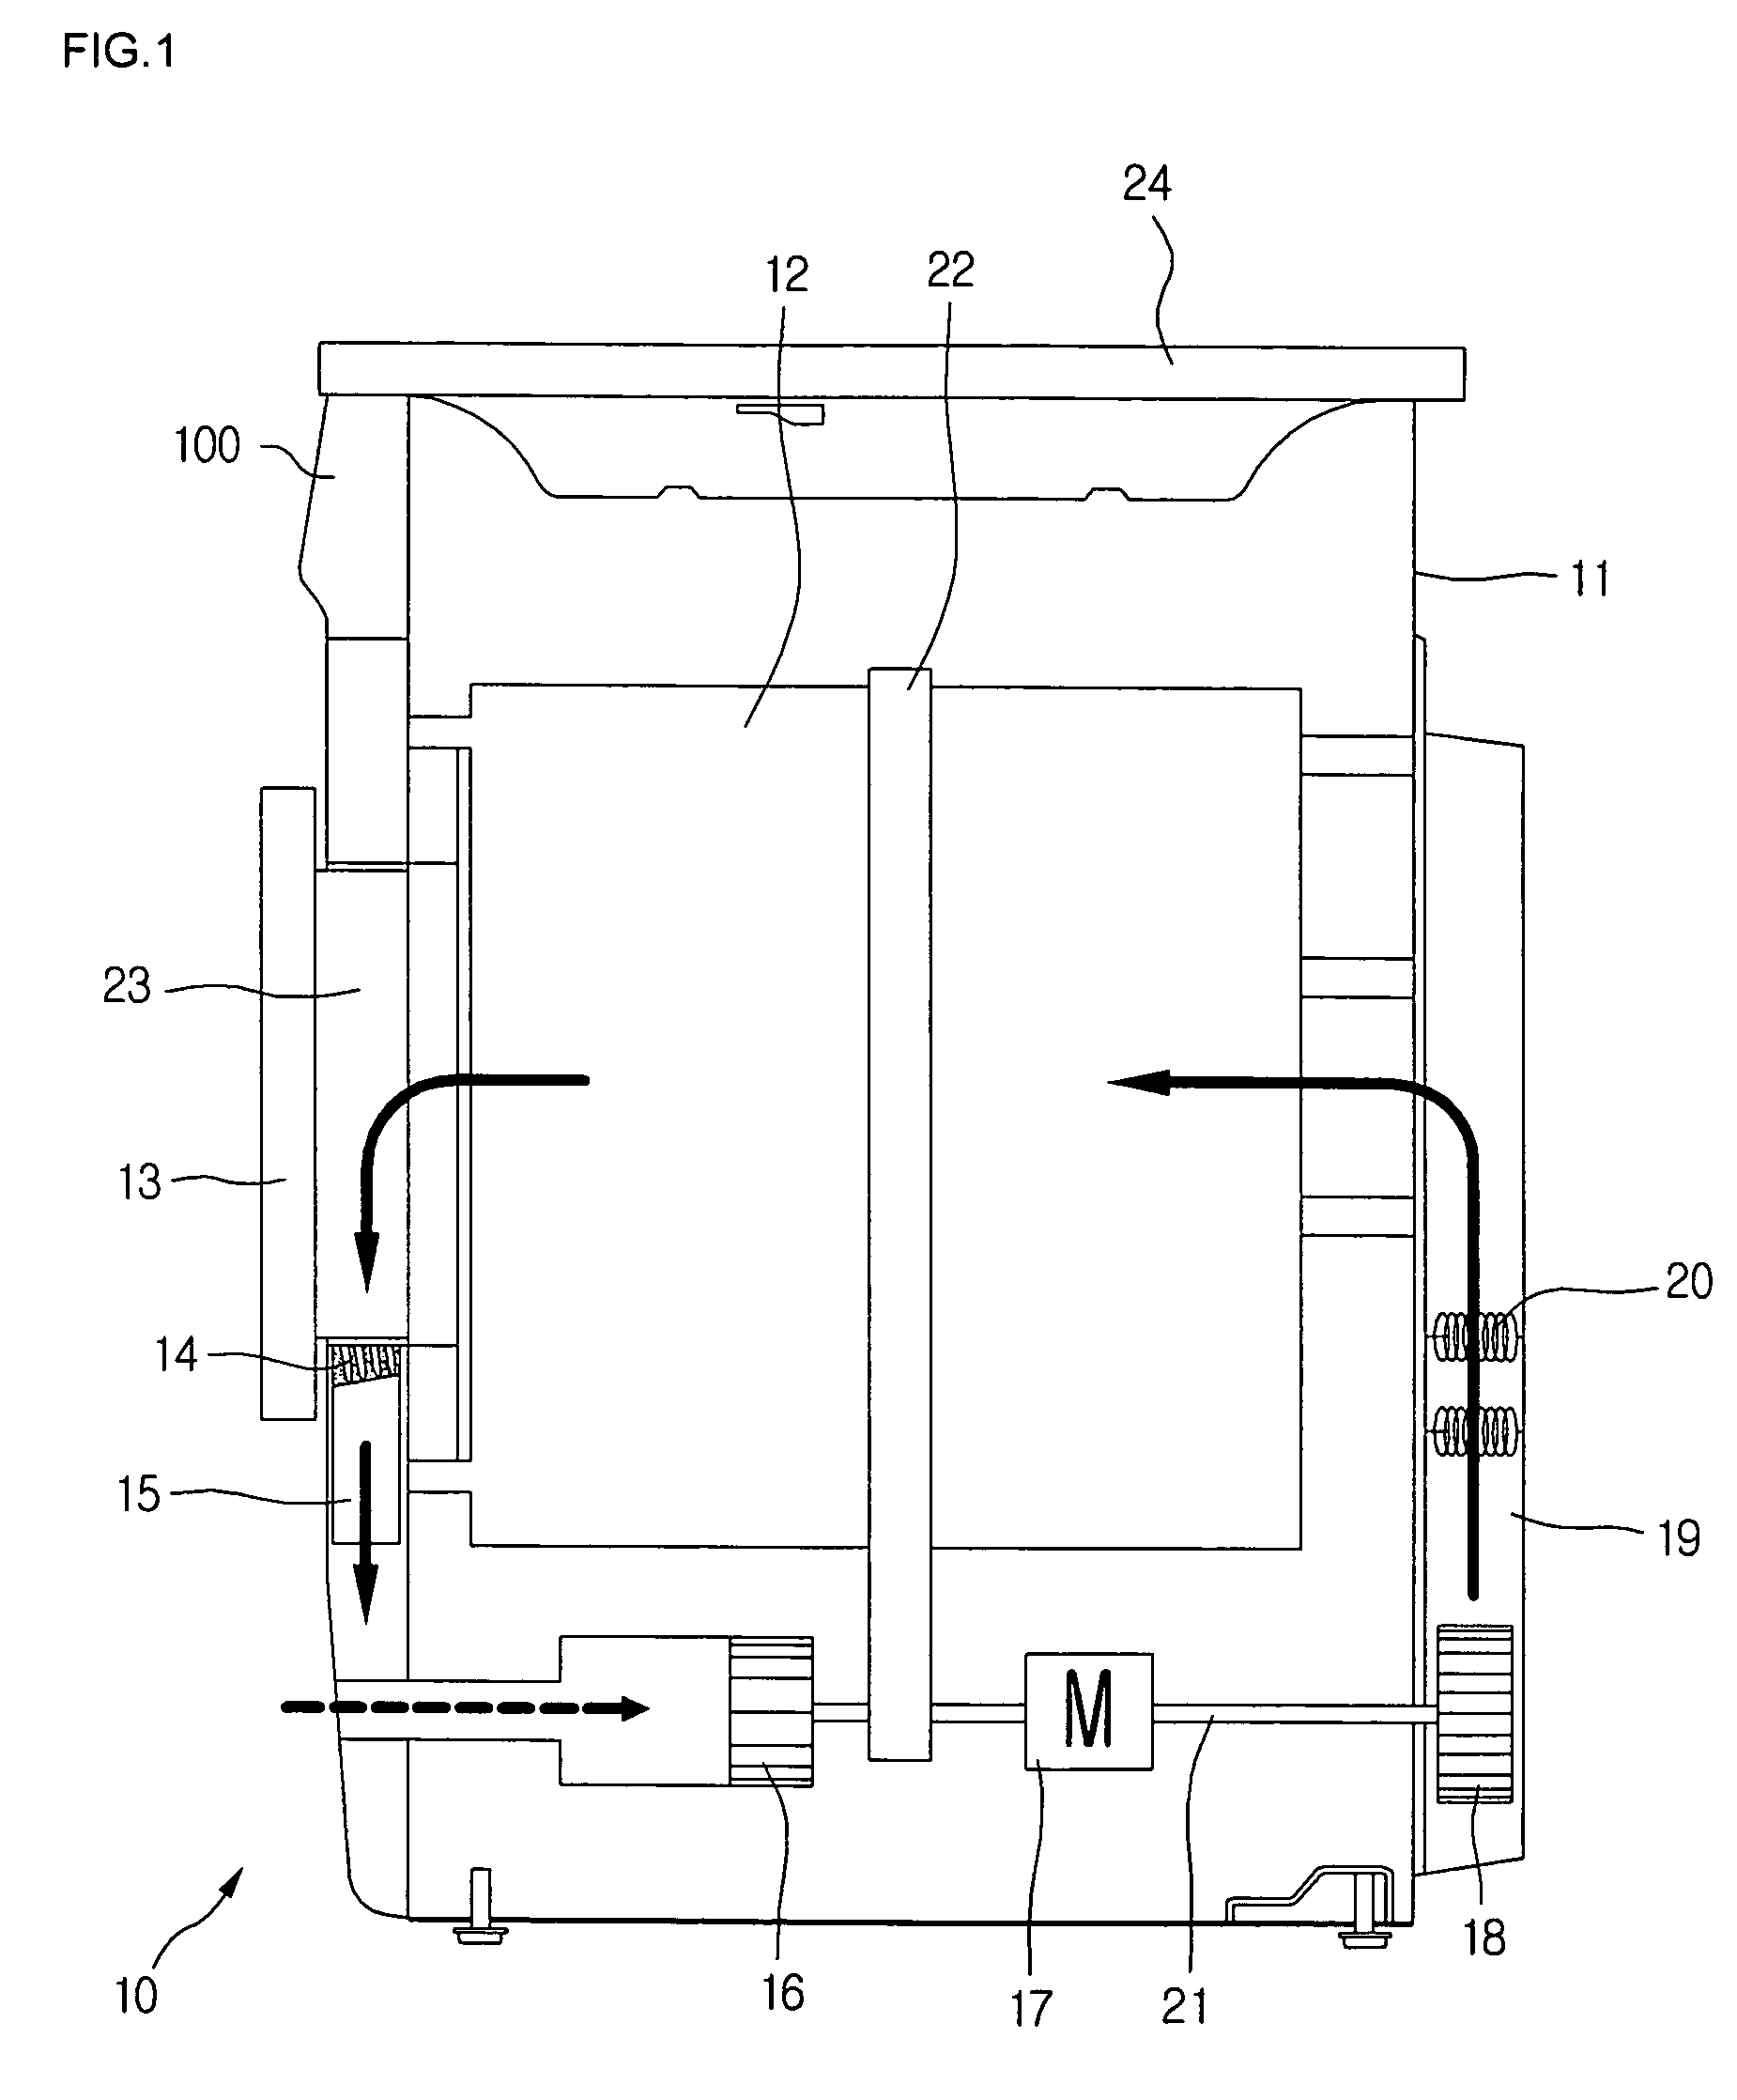 Condensed water storing apparatus of a dryer